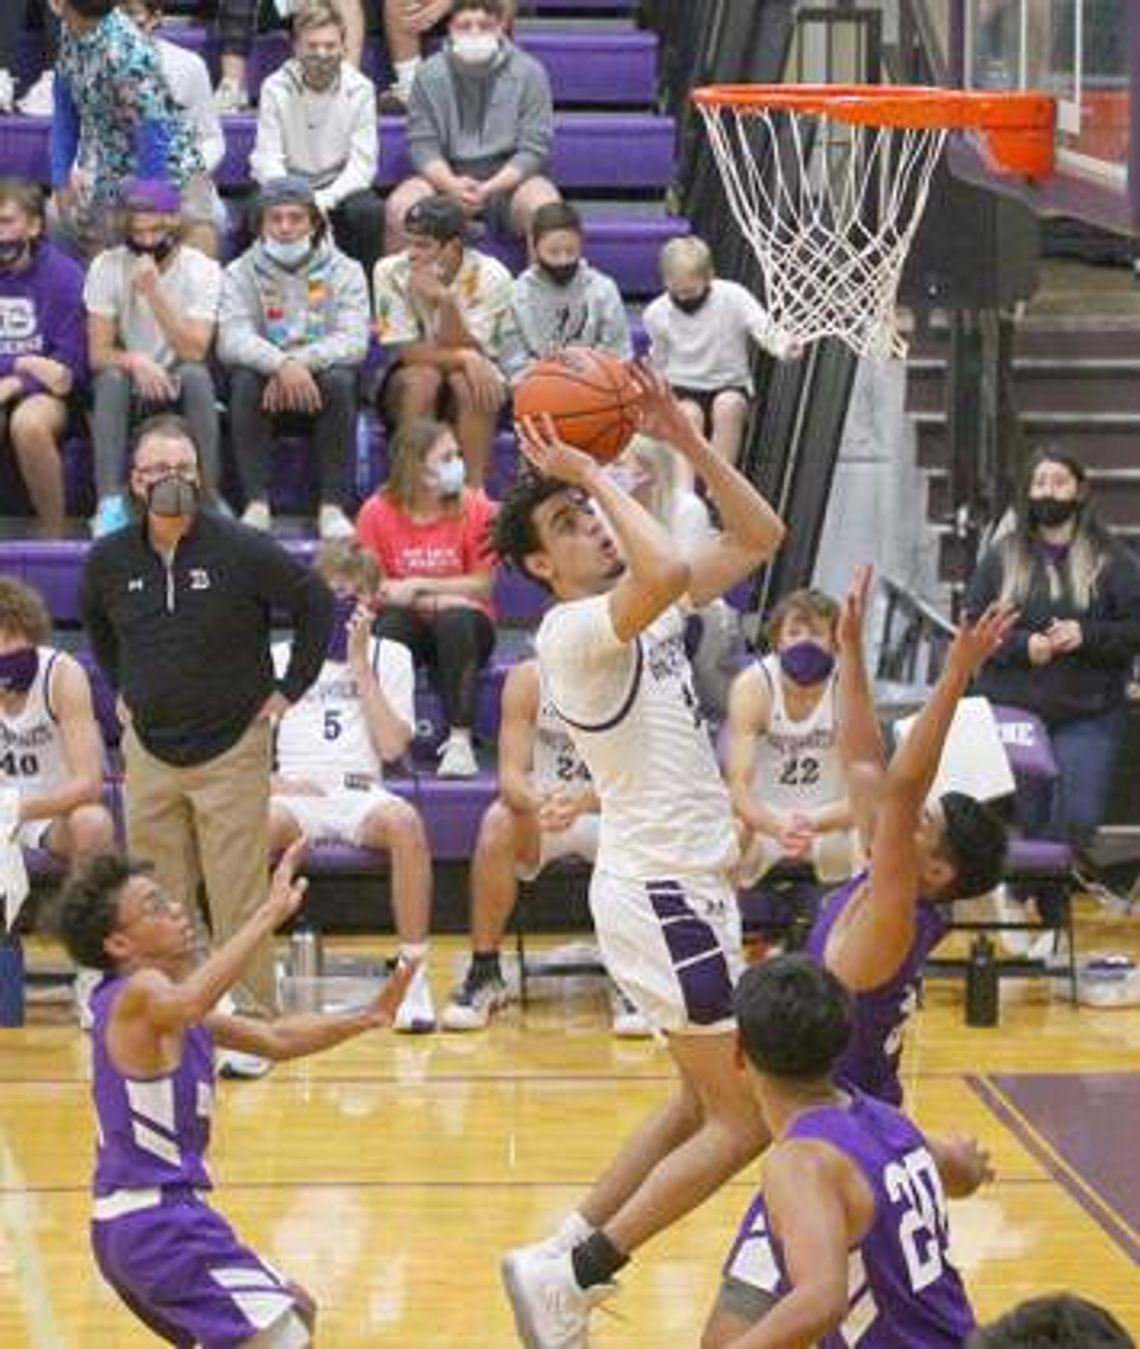 BHS boys improve to 7-0 in district